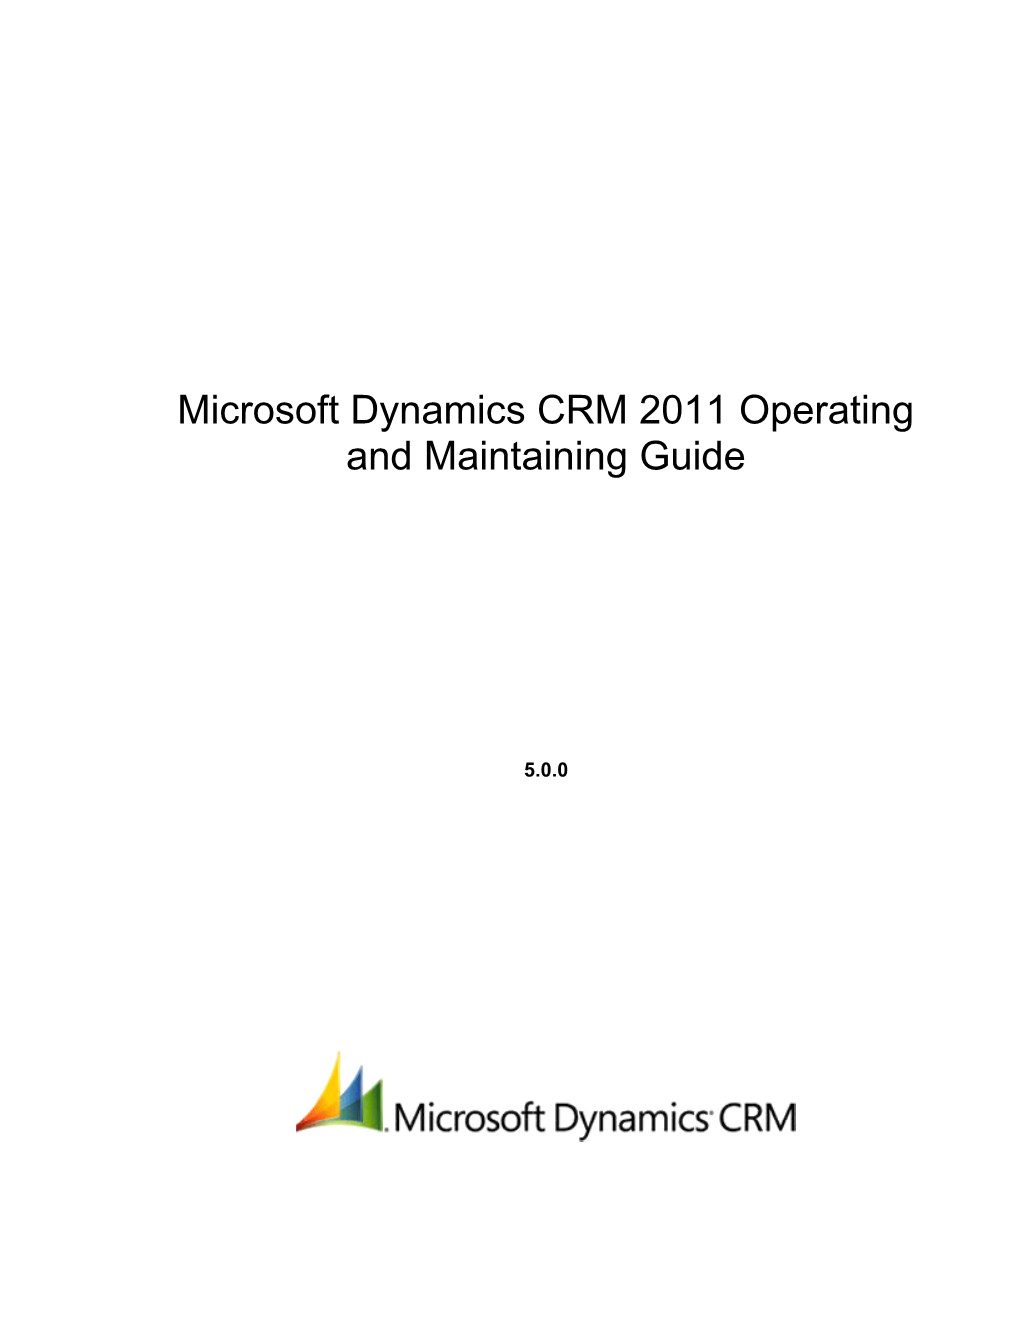 Microsoft Dynamics CRM 2011 Operating and Maintaining Guide